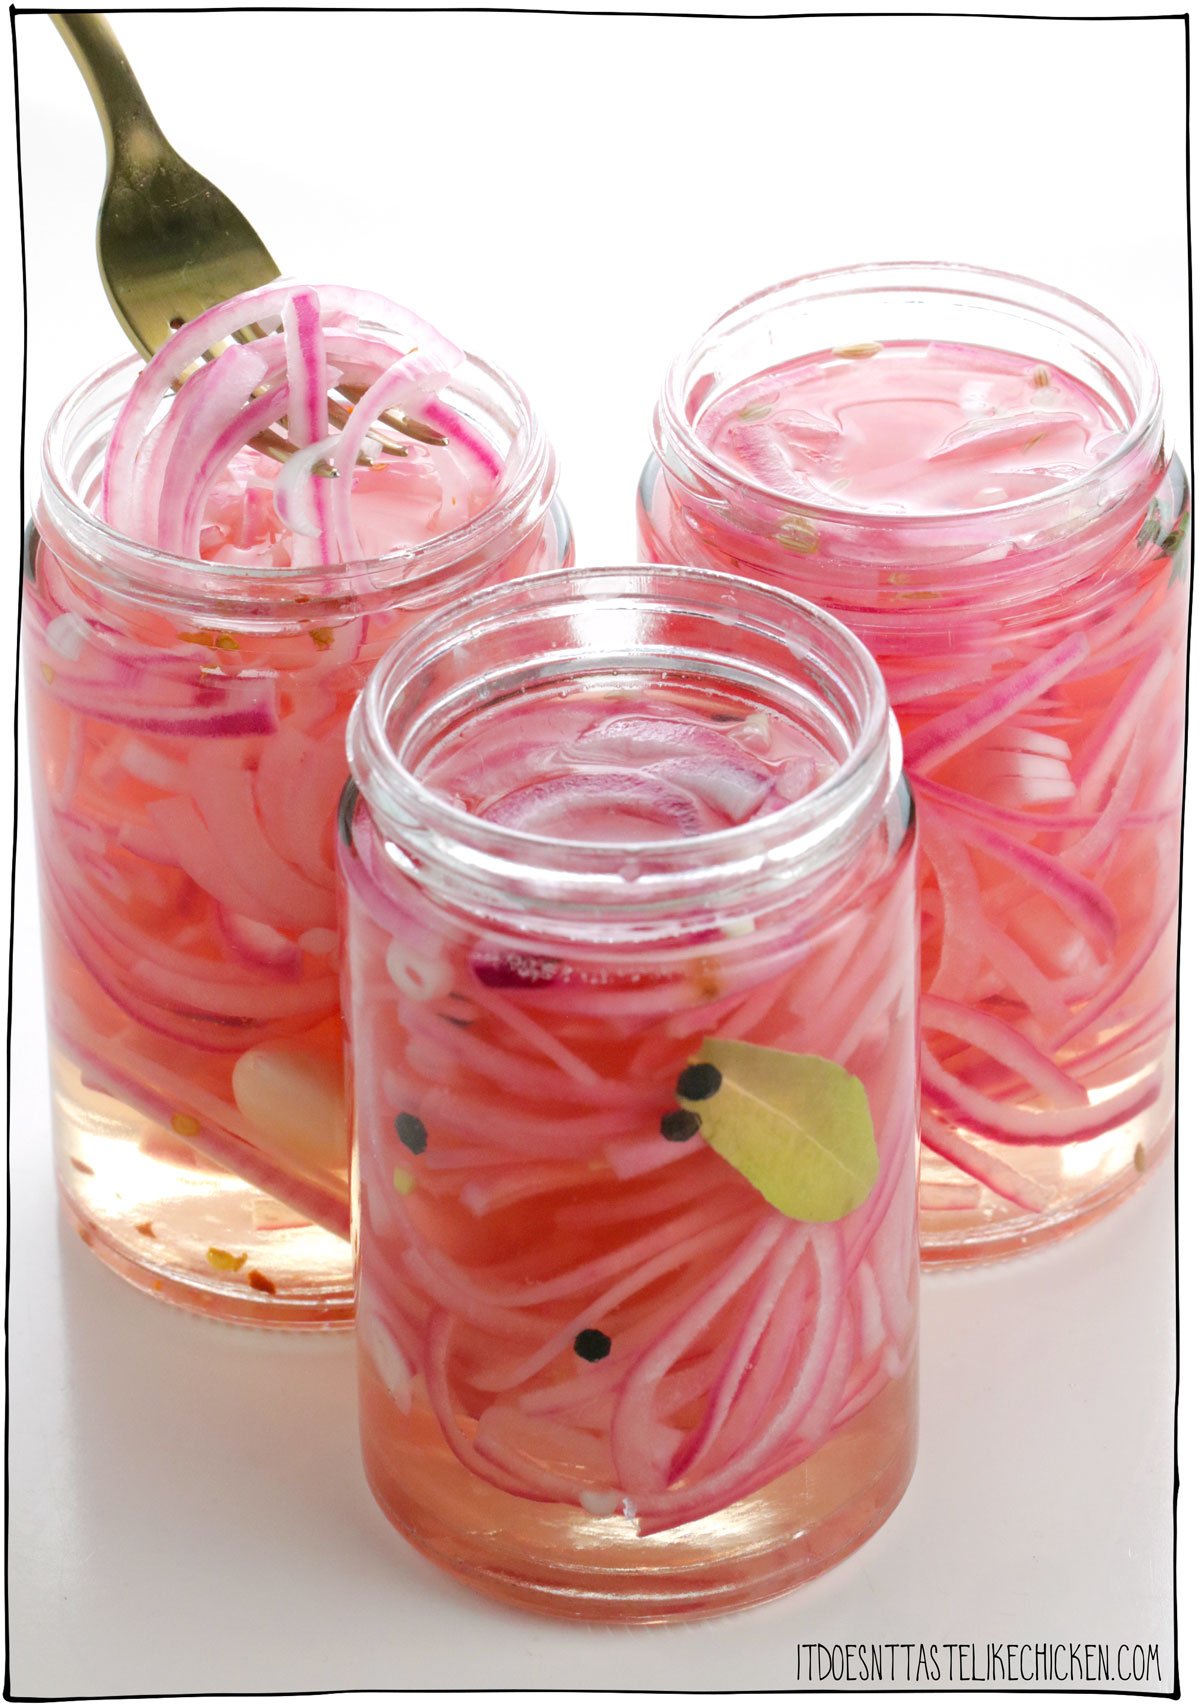 Pickled onions are super quick and easy to make with just 4 ingredients. They are such a beautiful color, they are tangy, sweet, and crunchy. This tasty condiment will elevate any dish. Use them on sandwiches, avocado toast, salads, soups, nachos, burgers, tacos, grain bowls, or just eat them straight from the jar. Yum! #itdoesnttastelikechicken #zerowaste #pickle